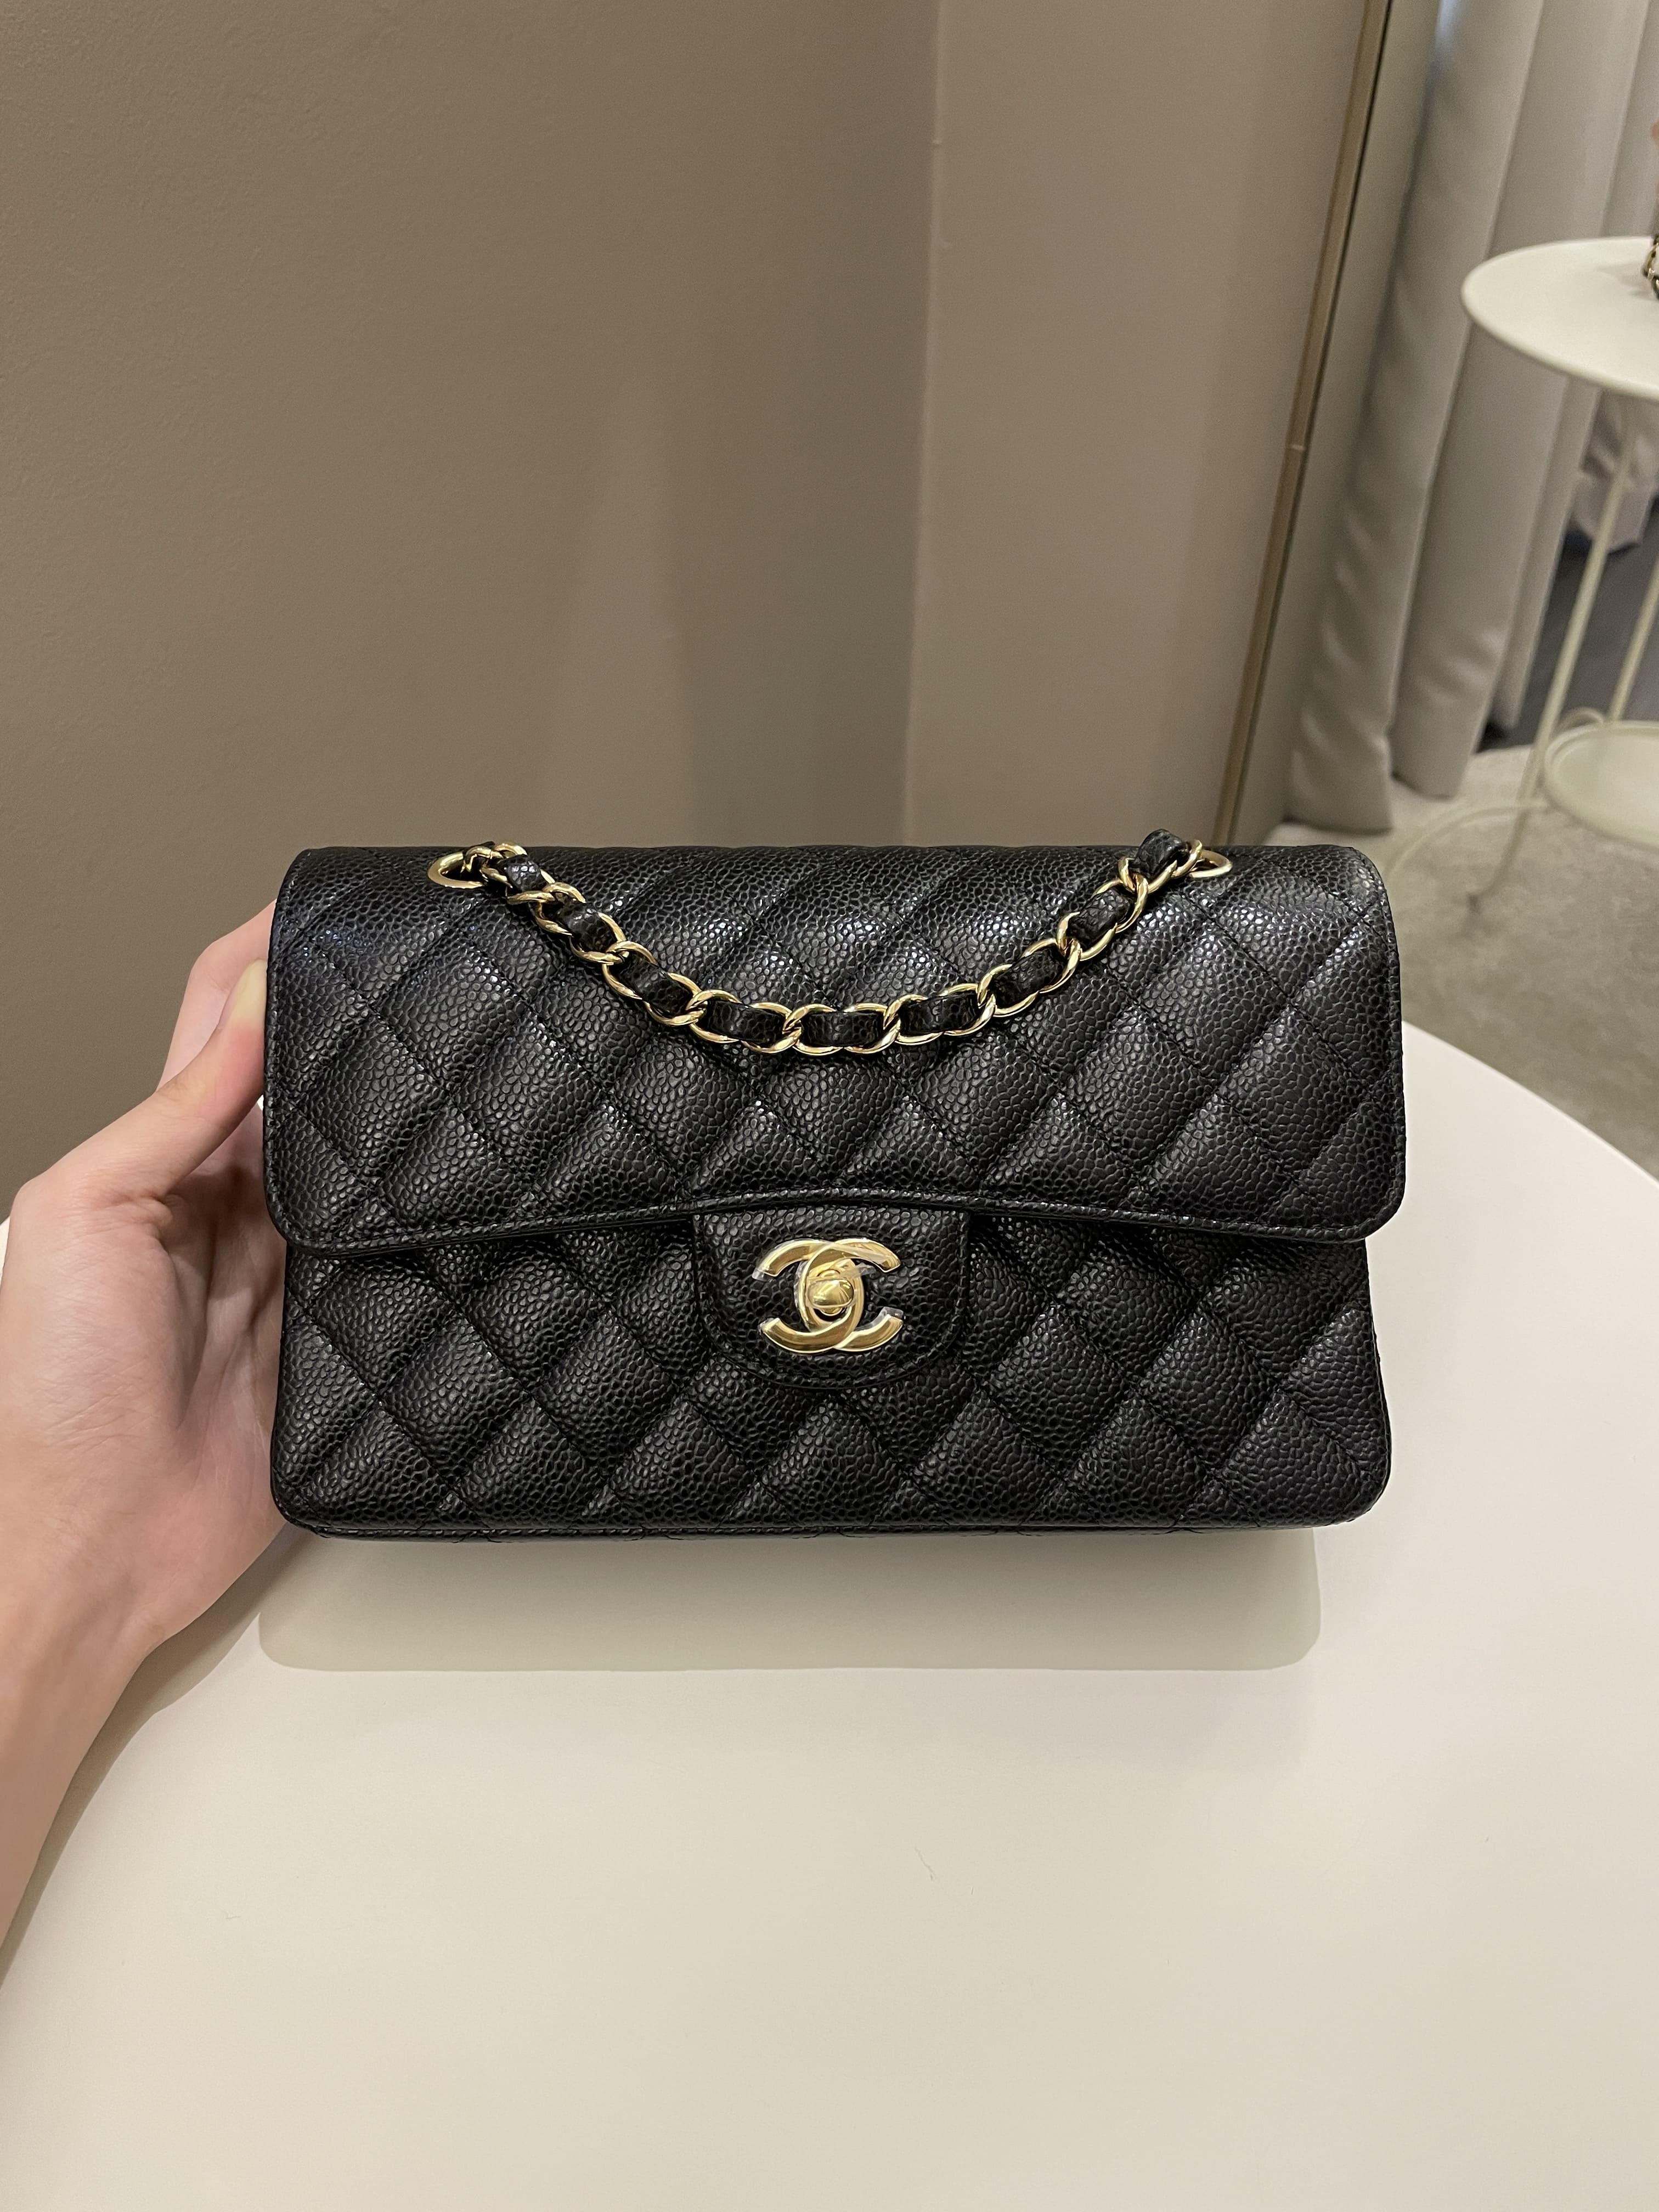 Black Chanel Small Classic Lambskin Double Flap Shoulder Bag